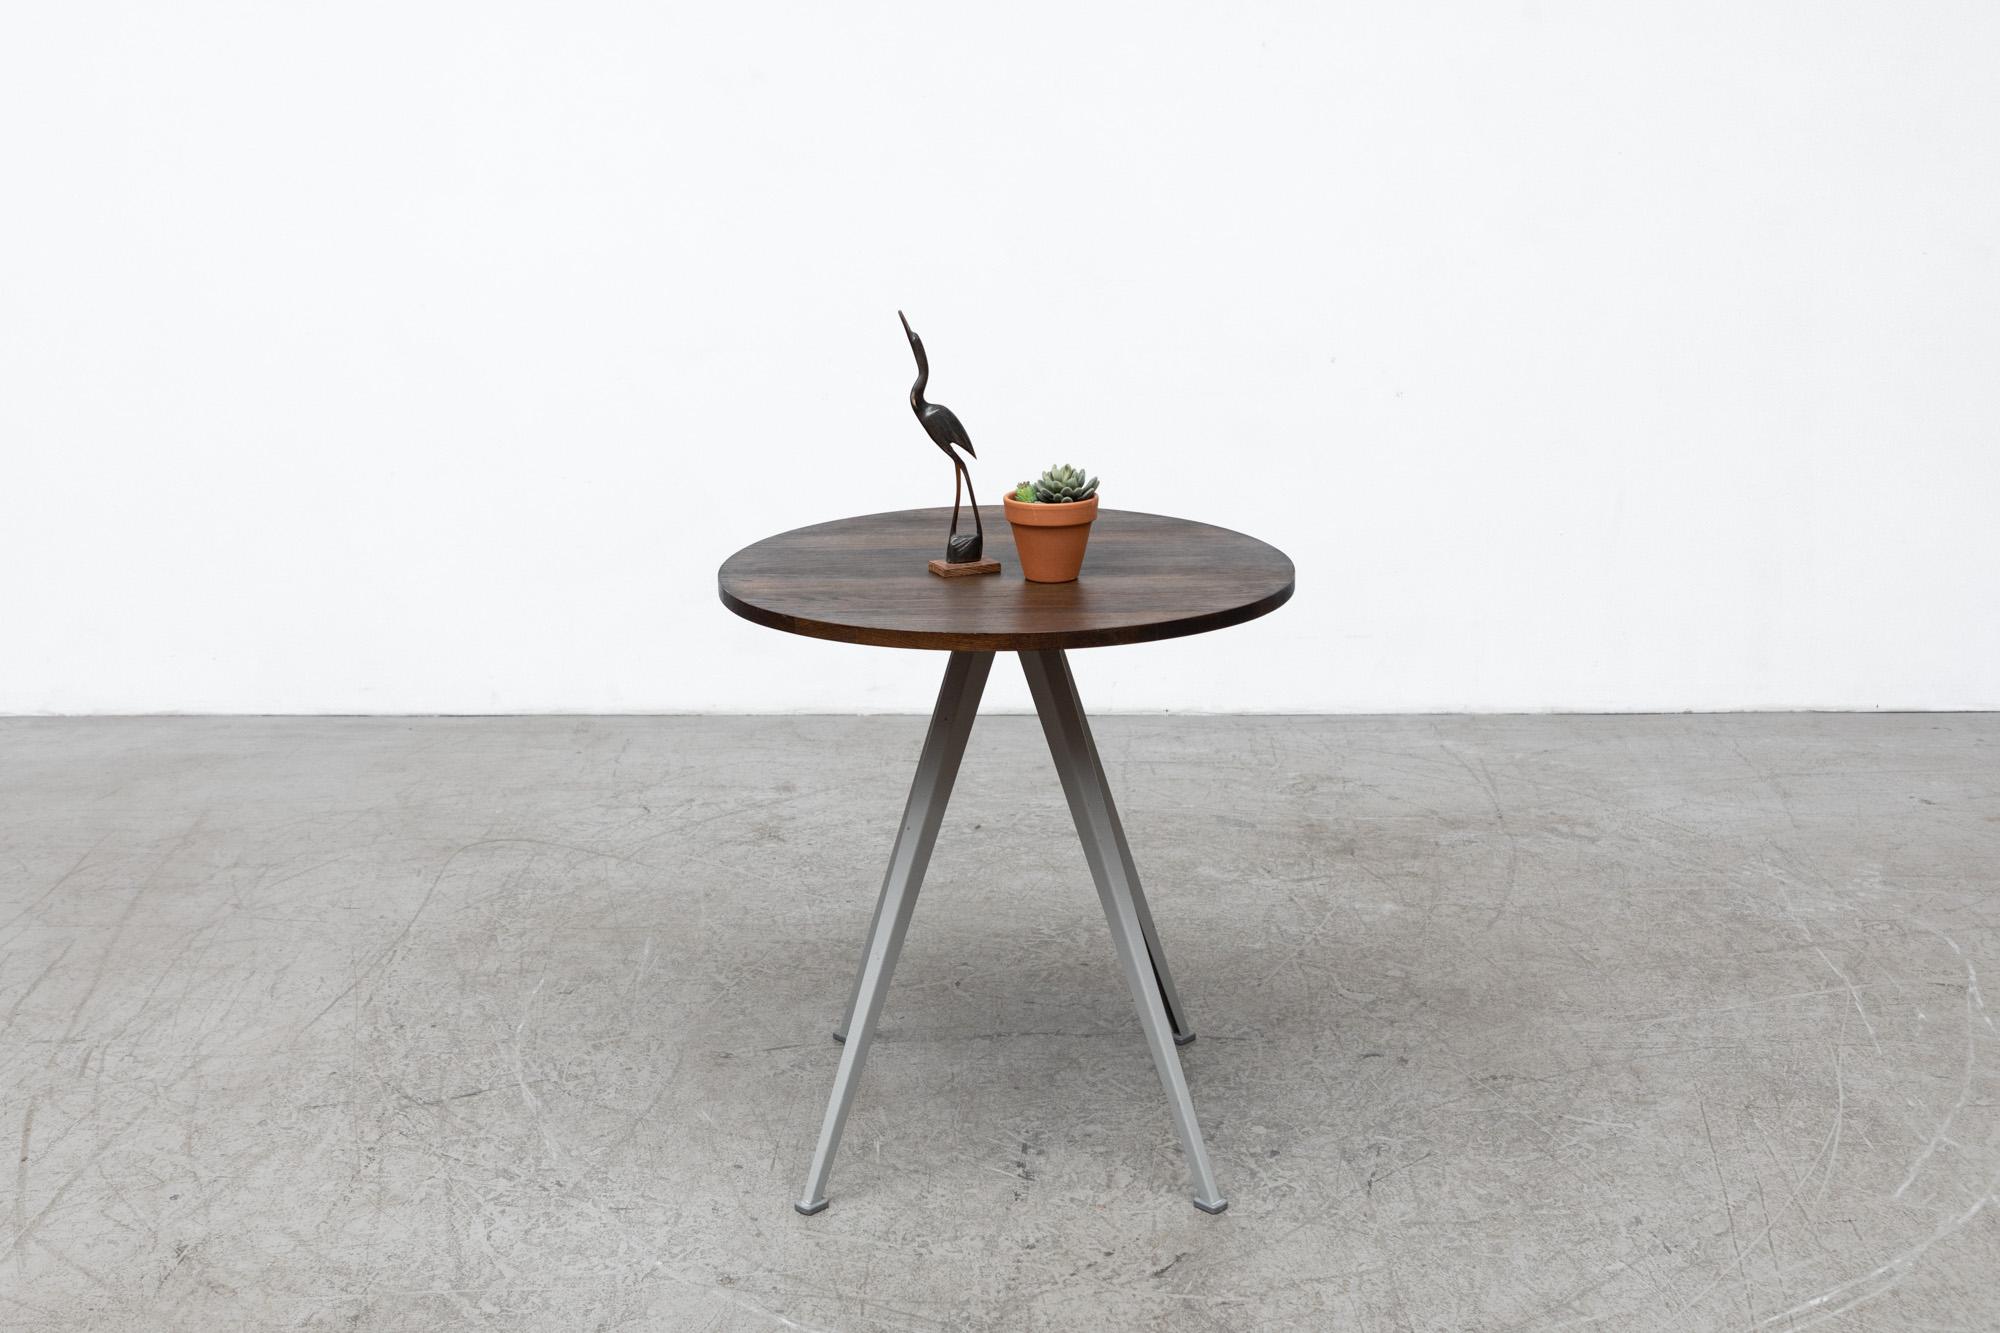 Side table with round smoked oak wood top and grey enameled metal pyramid legs designed by Friso Kramer and Wim Rietveld for Ahrend in the 1950s and reissued in 2015 by Hay. In original condition, with minimal wear that is consistent with age and